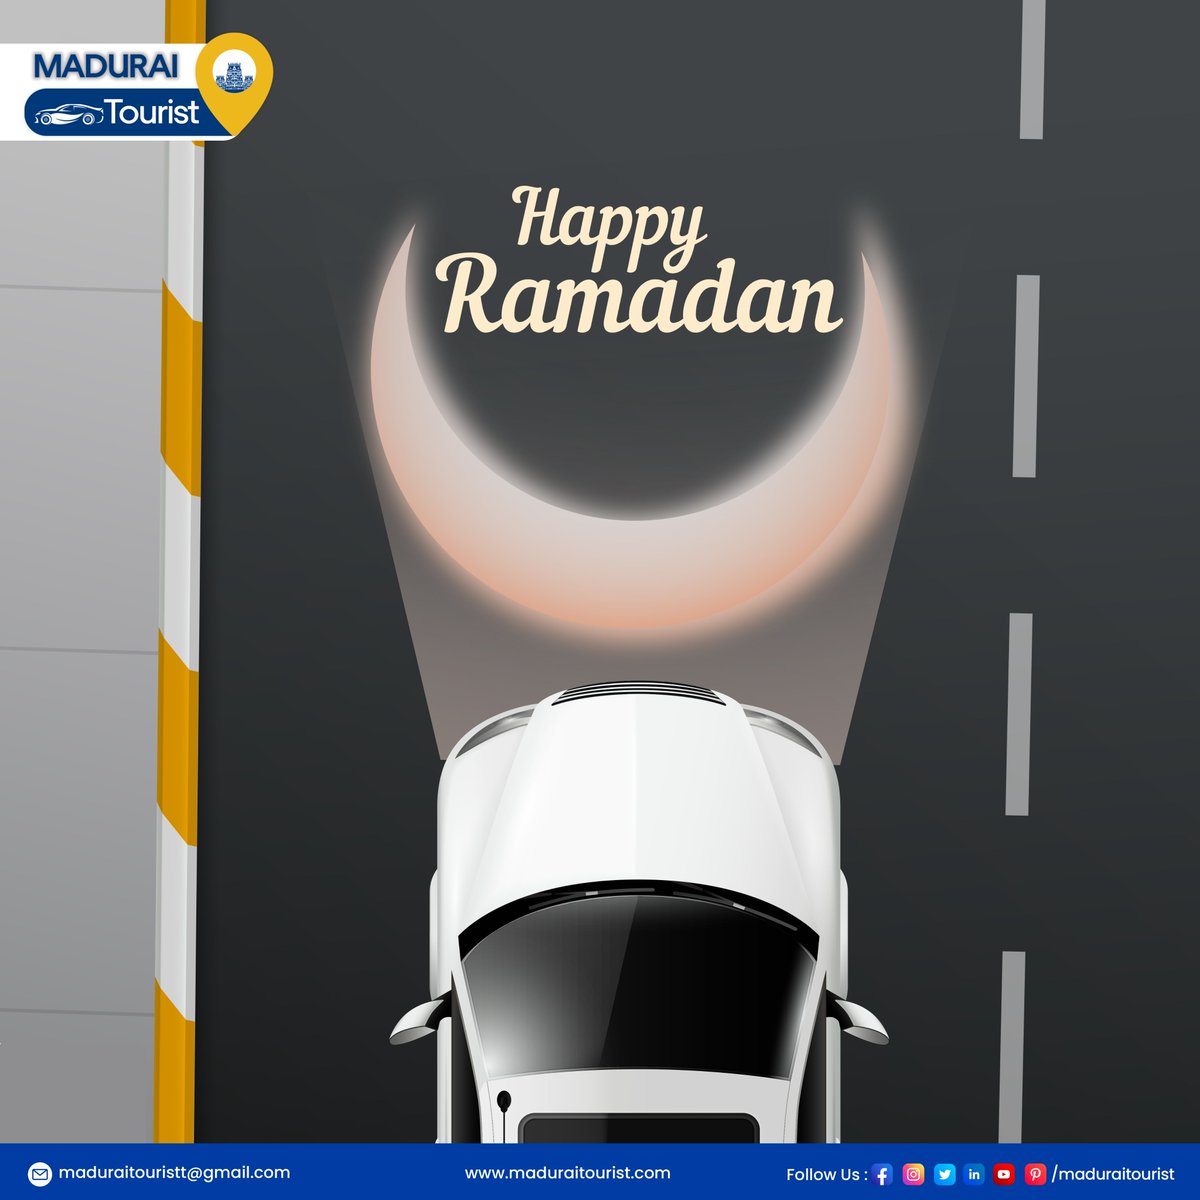 Wishing you a Ramadan filled with opportunities to share kindness, give generously, and spread joy to those around you. 🌙✨🌟

#MaduraiTourist #RamadanKindness #GenerousGiving #SpreadJoy #RamadanBlessings #KindnessInRamadan #JoyfulRamadan #RamadanSpirit #Ramadan2024